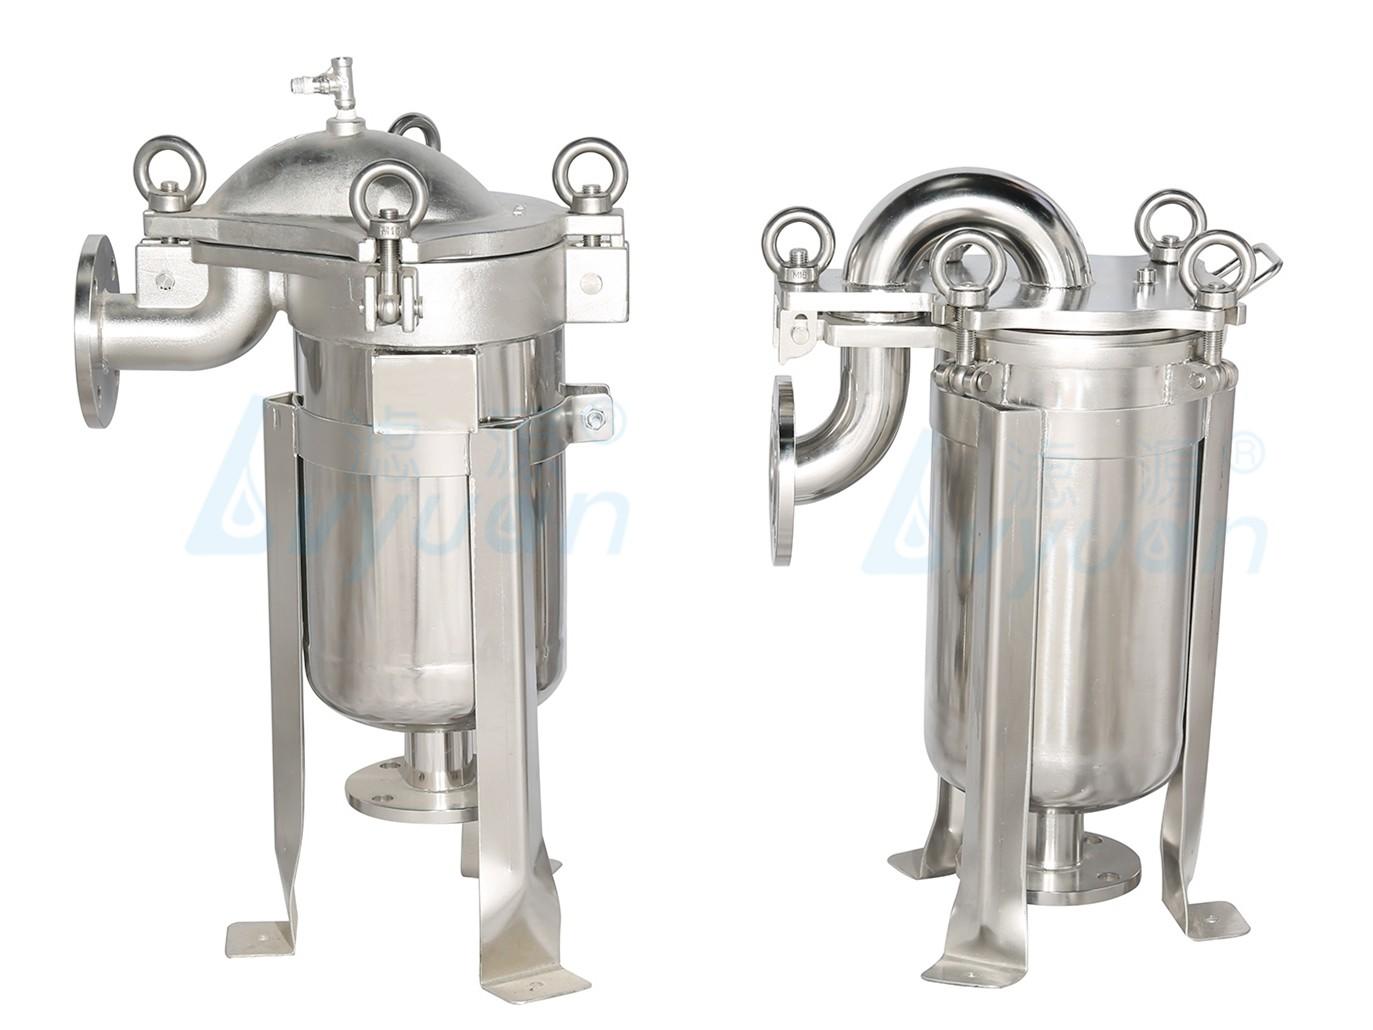 Lvyuan stainless filter housing with core for sea water desalination